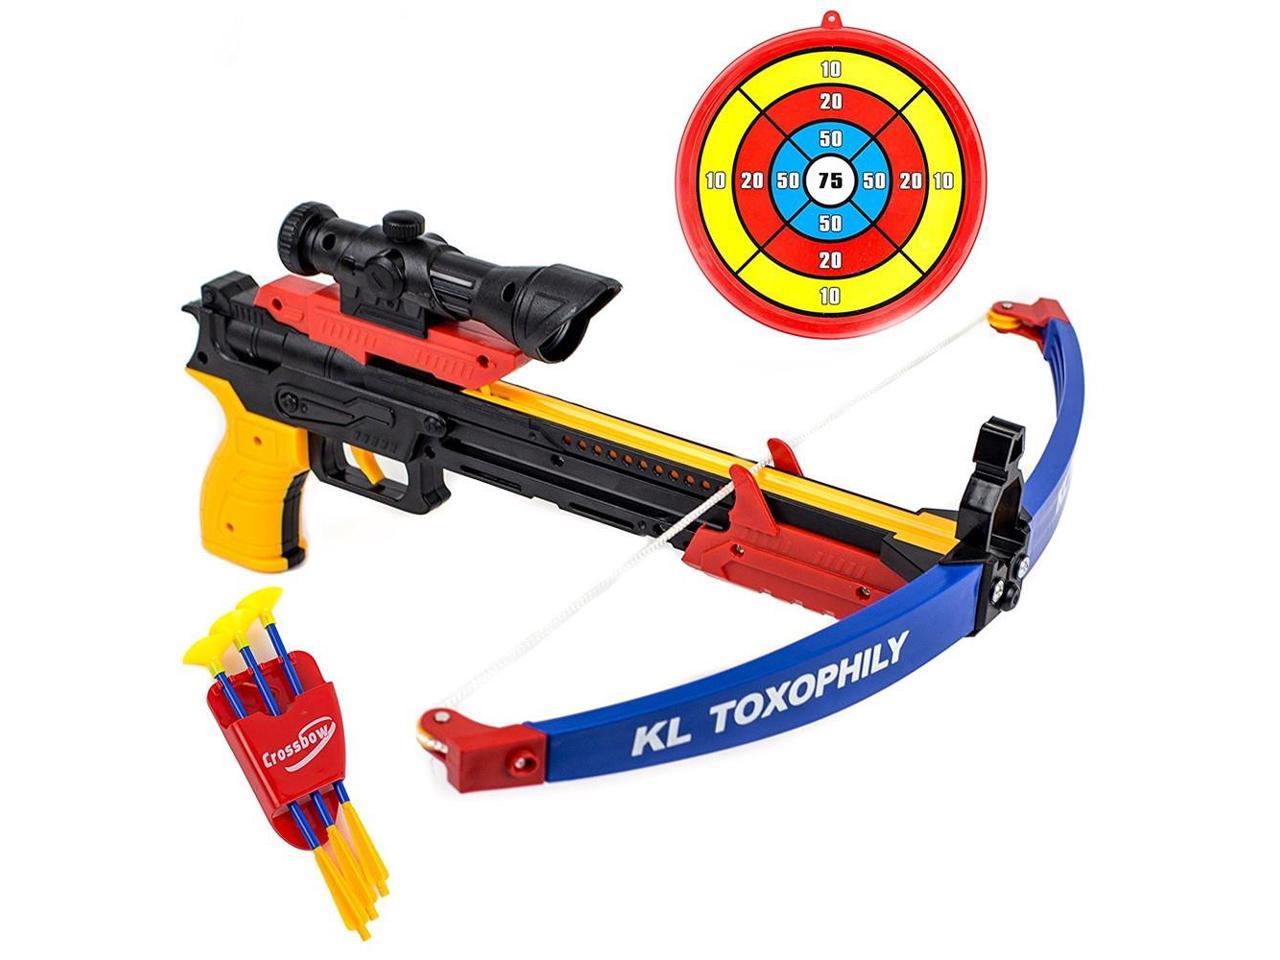 Toysery Real Crossbow Archery Set Absolutely Safe for Kids Holiday Toys Gift 